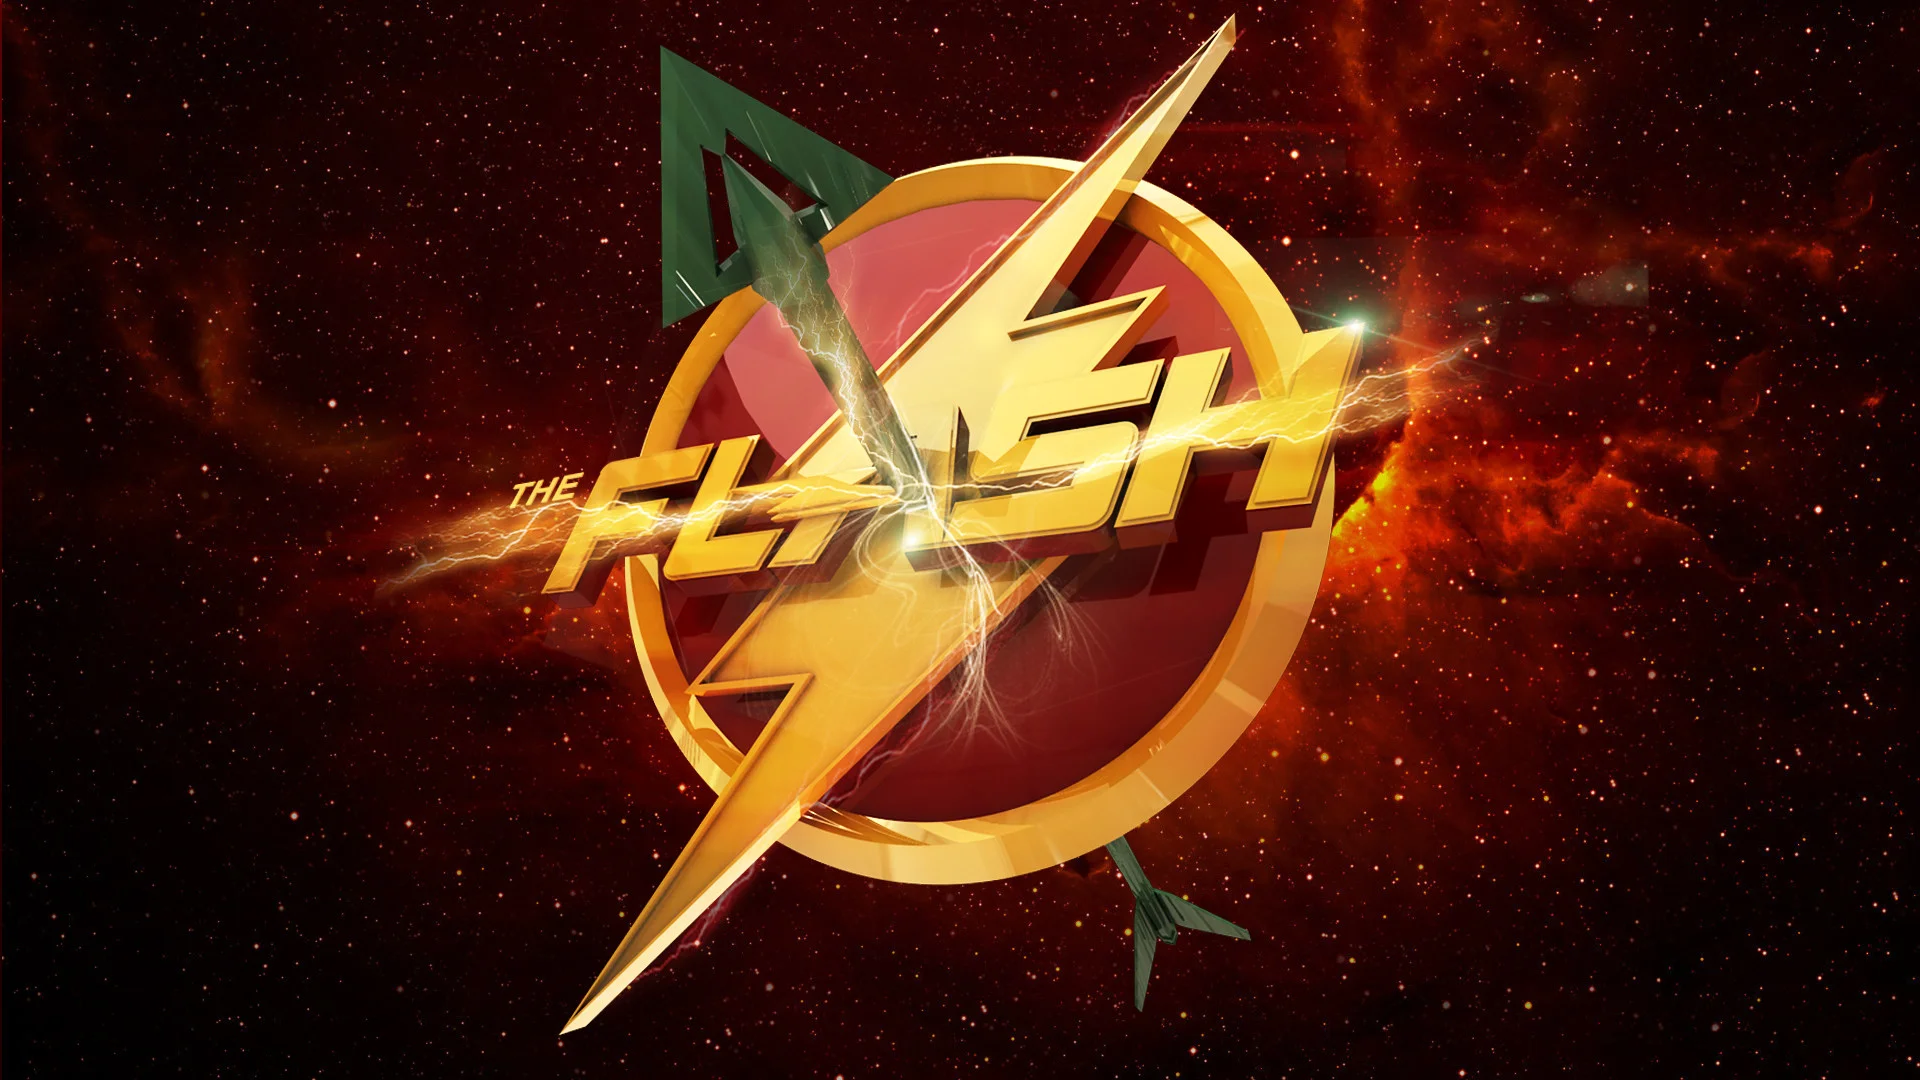 FULL HD / / The Flash Wallpapers and Desktop Backgrounds .